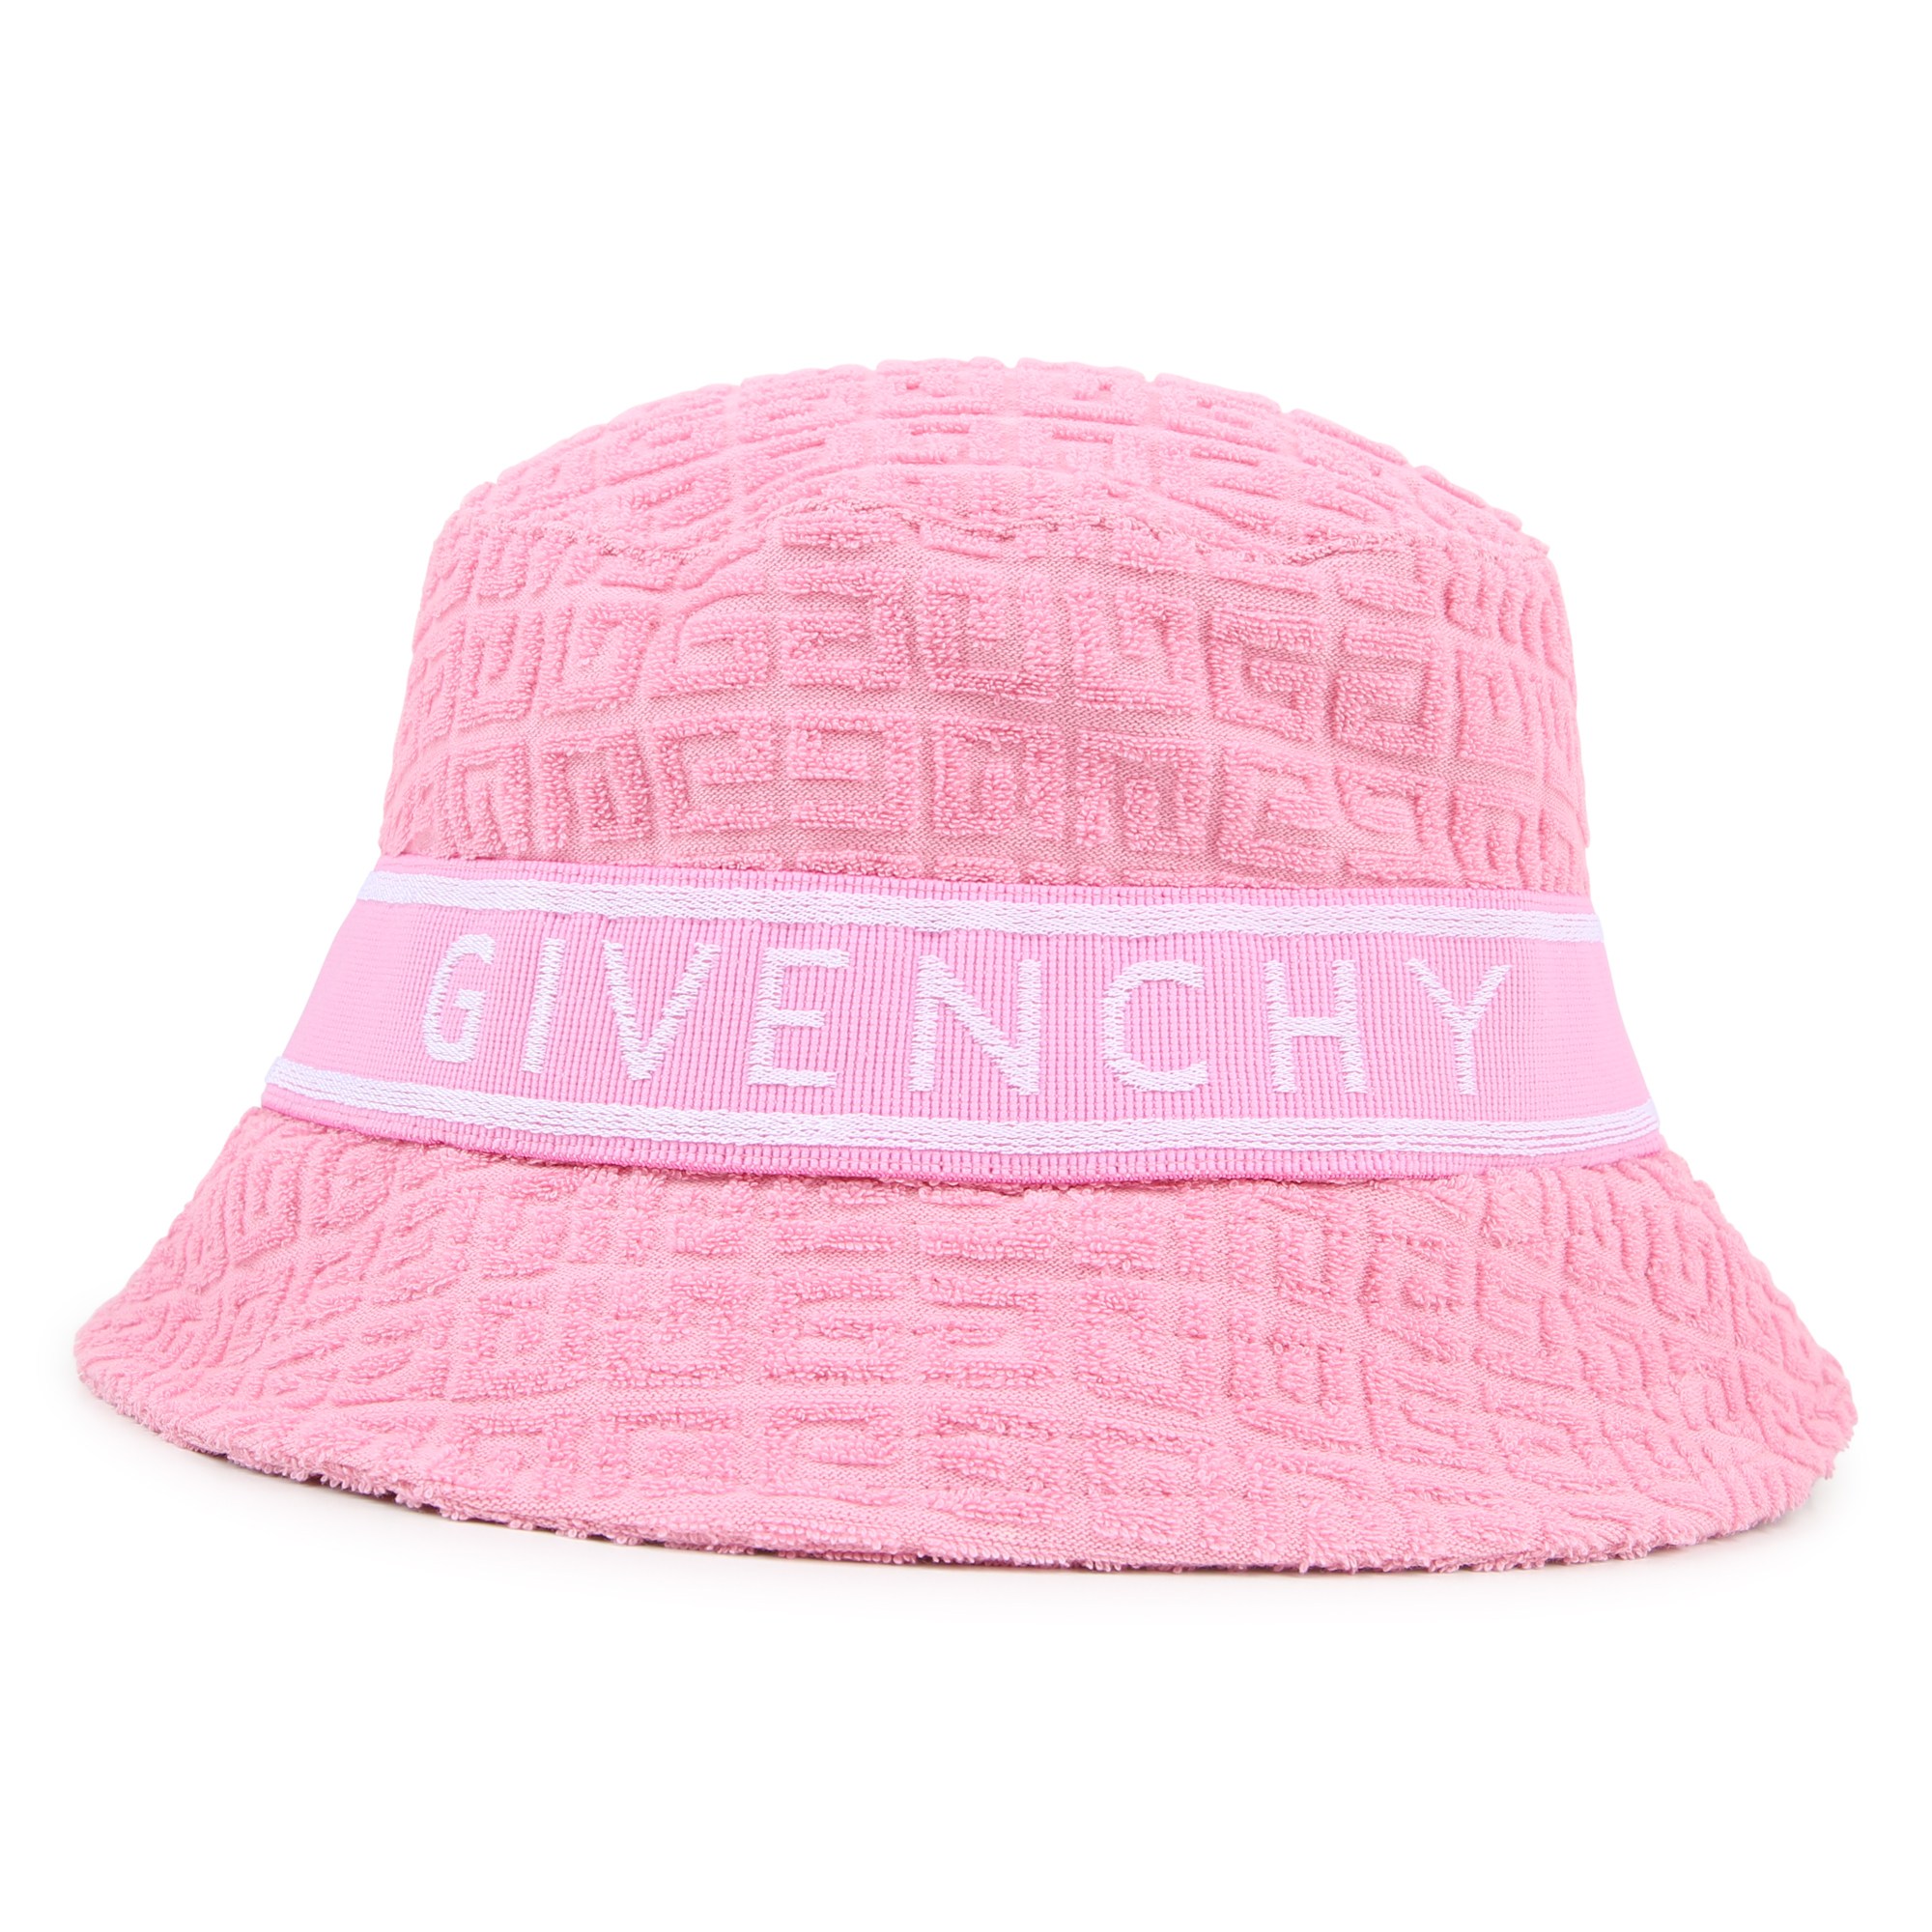 Printed cotton bucket hat GIVENCHY for GIRL